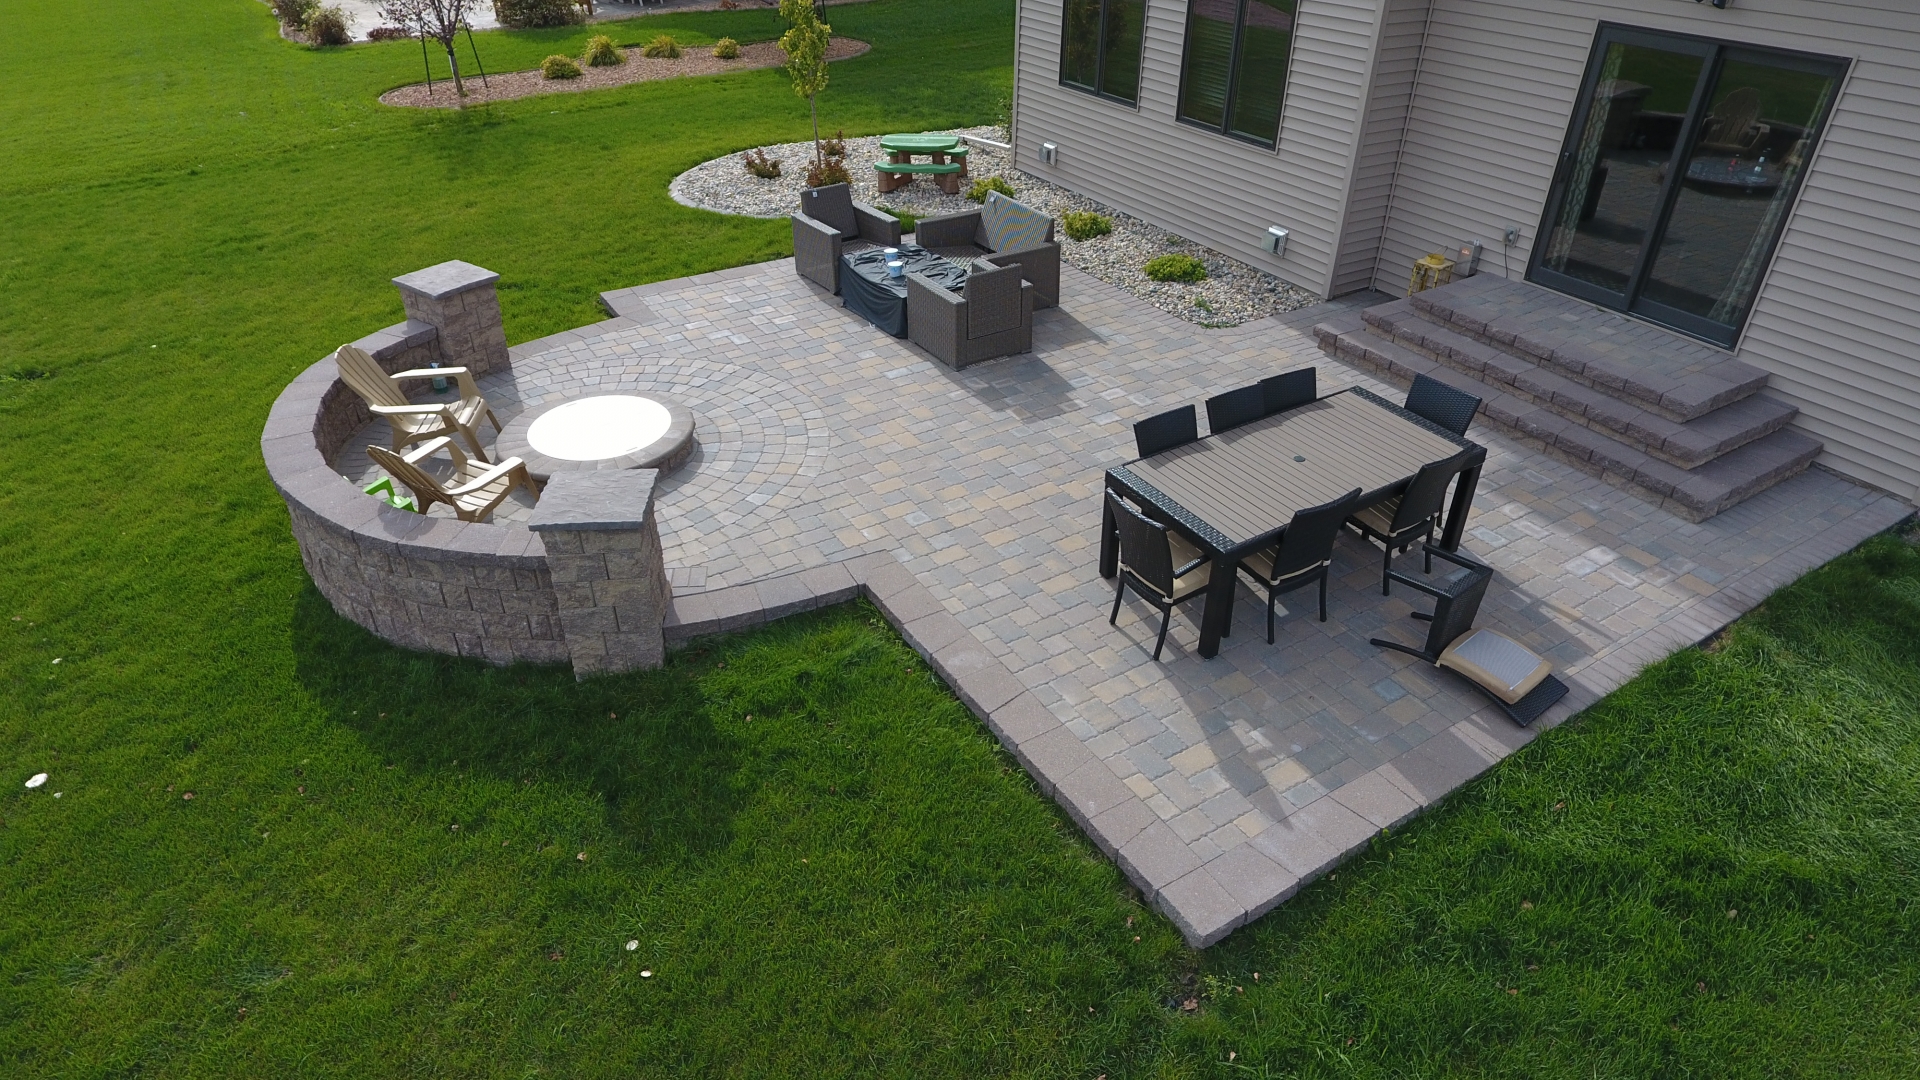 Backyard Fire Pit With Seat Wall And Paver Patio Oasis Landscapes